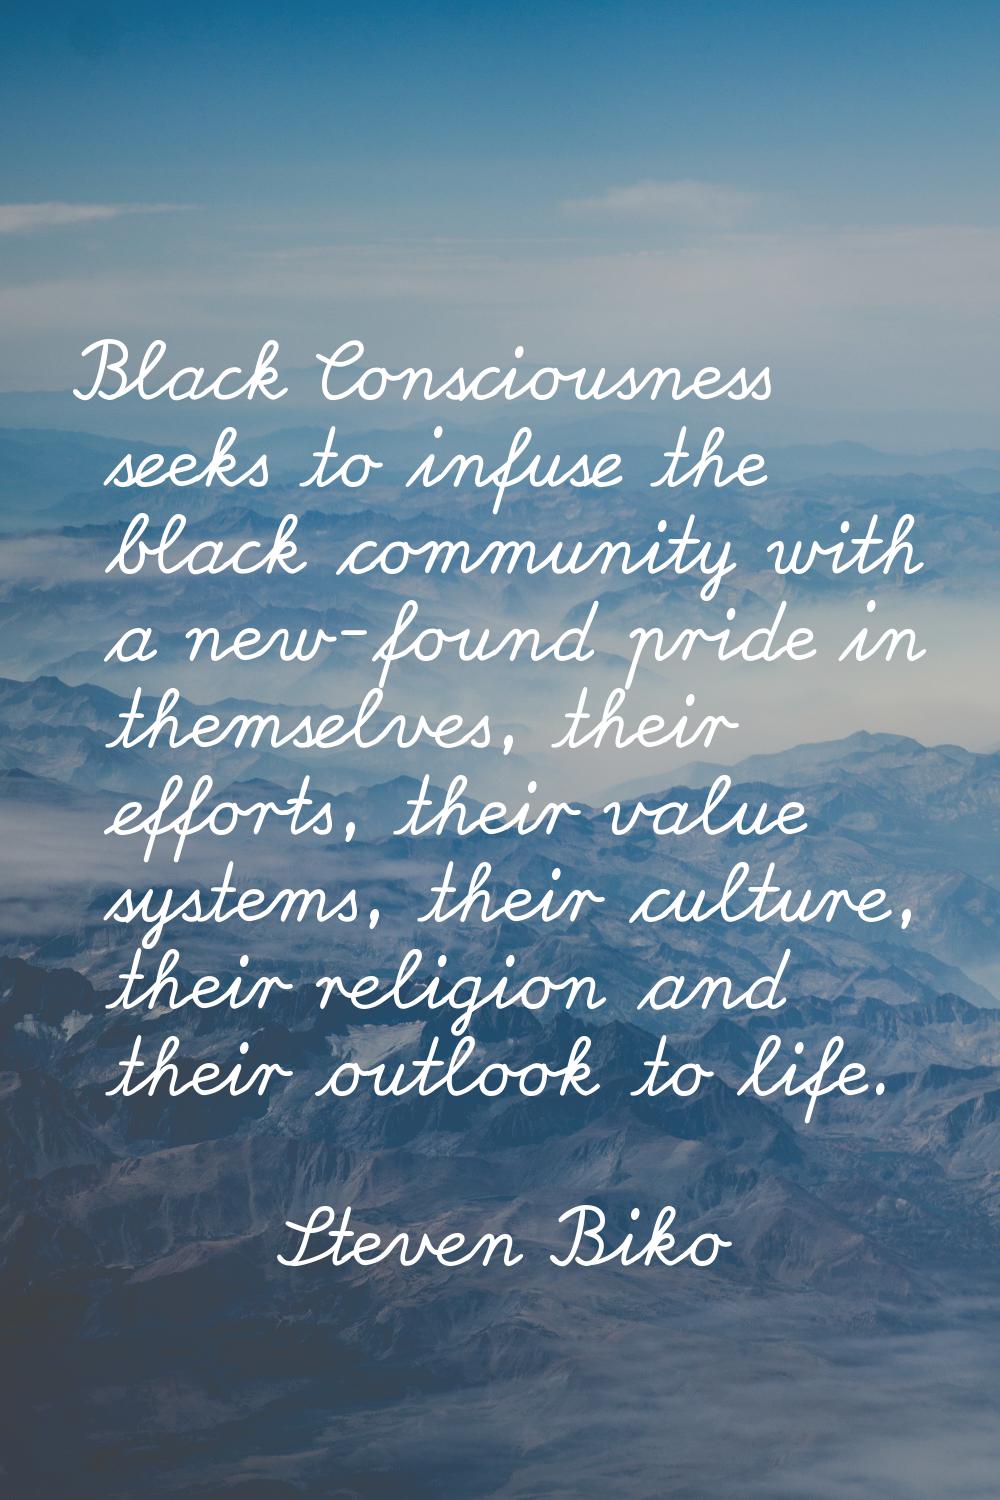 Black Consciousness seeks to infuse the black community with a new-found pride in themselves, their